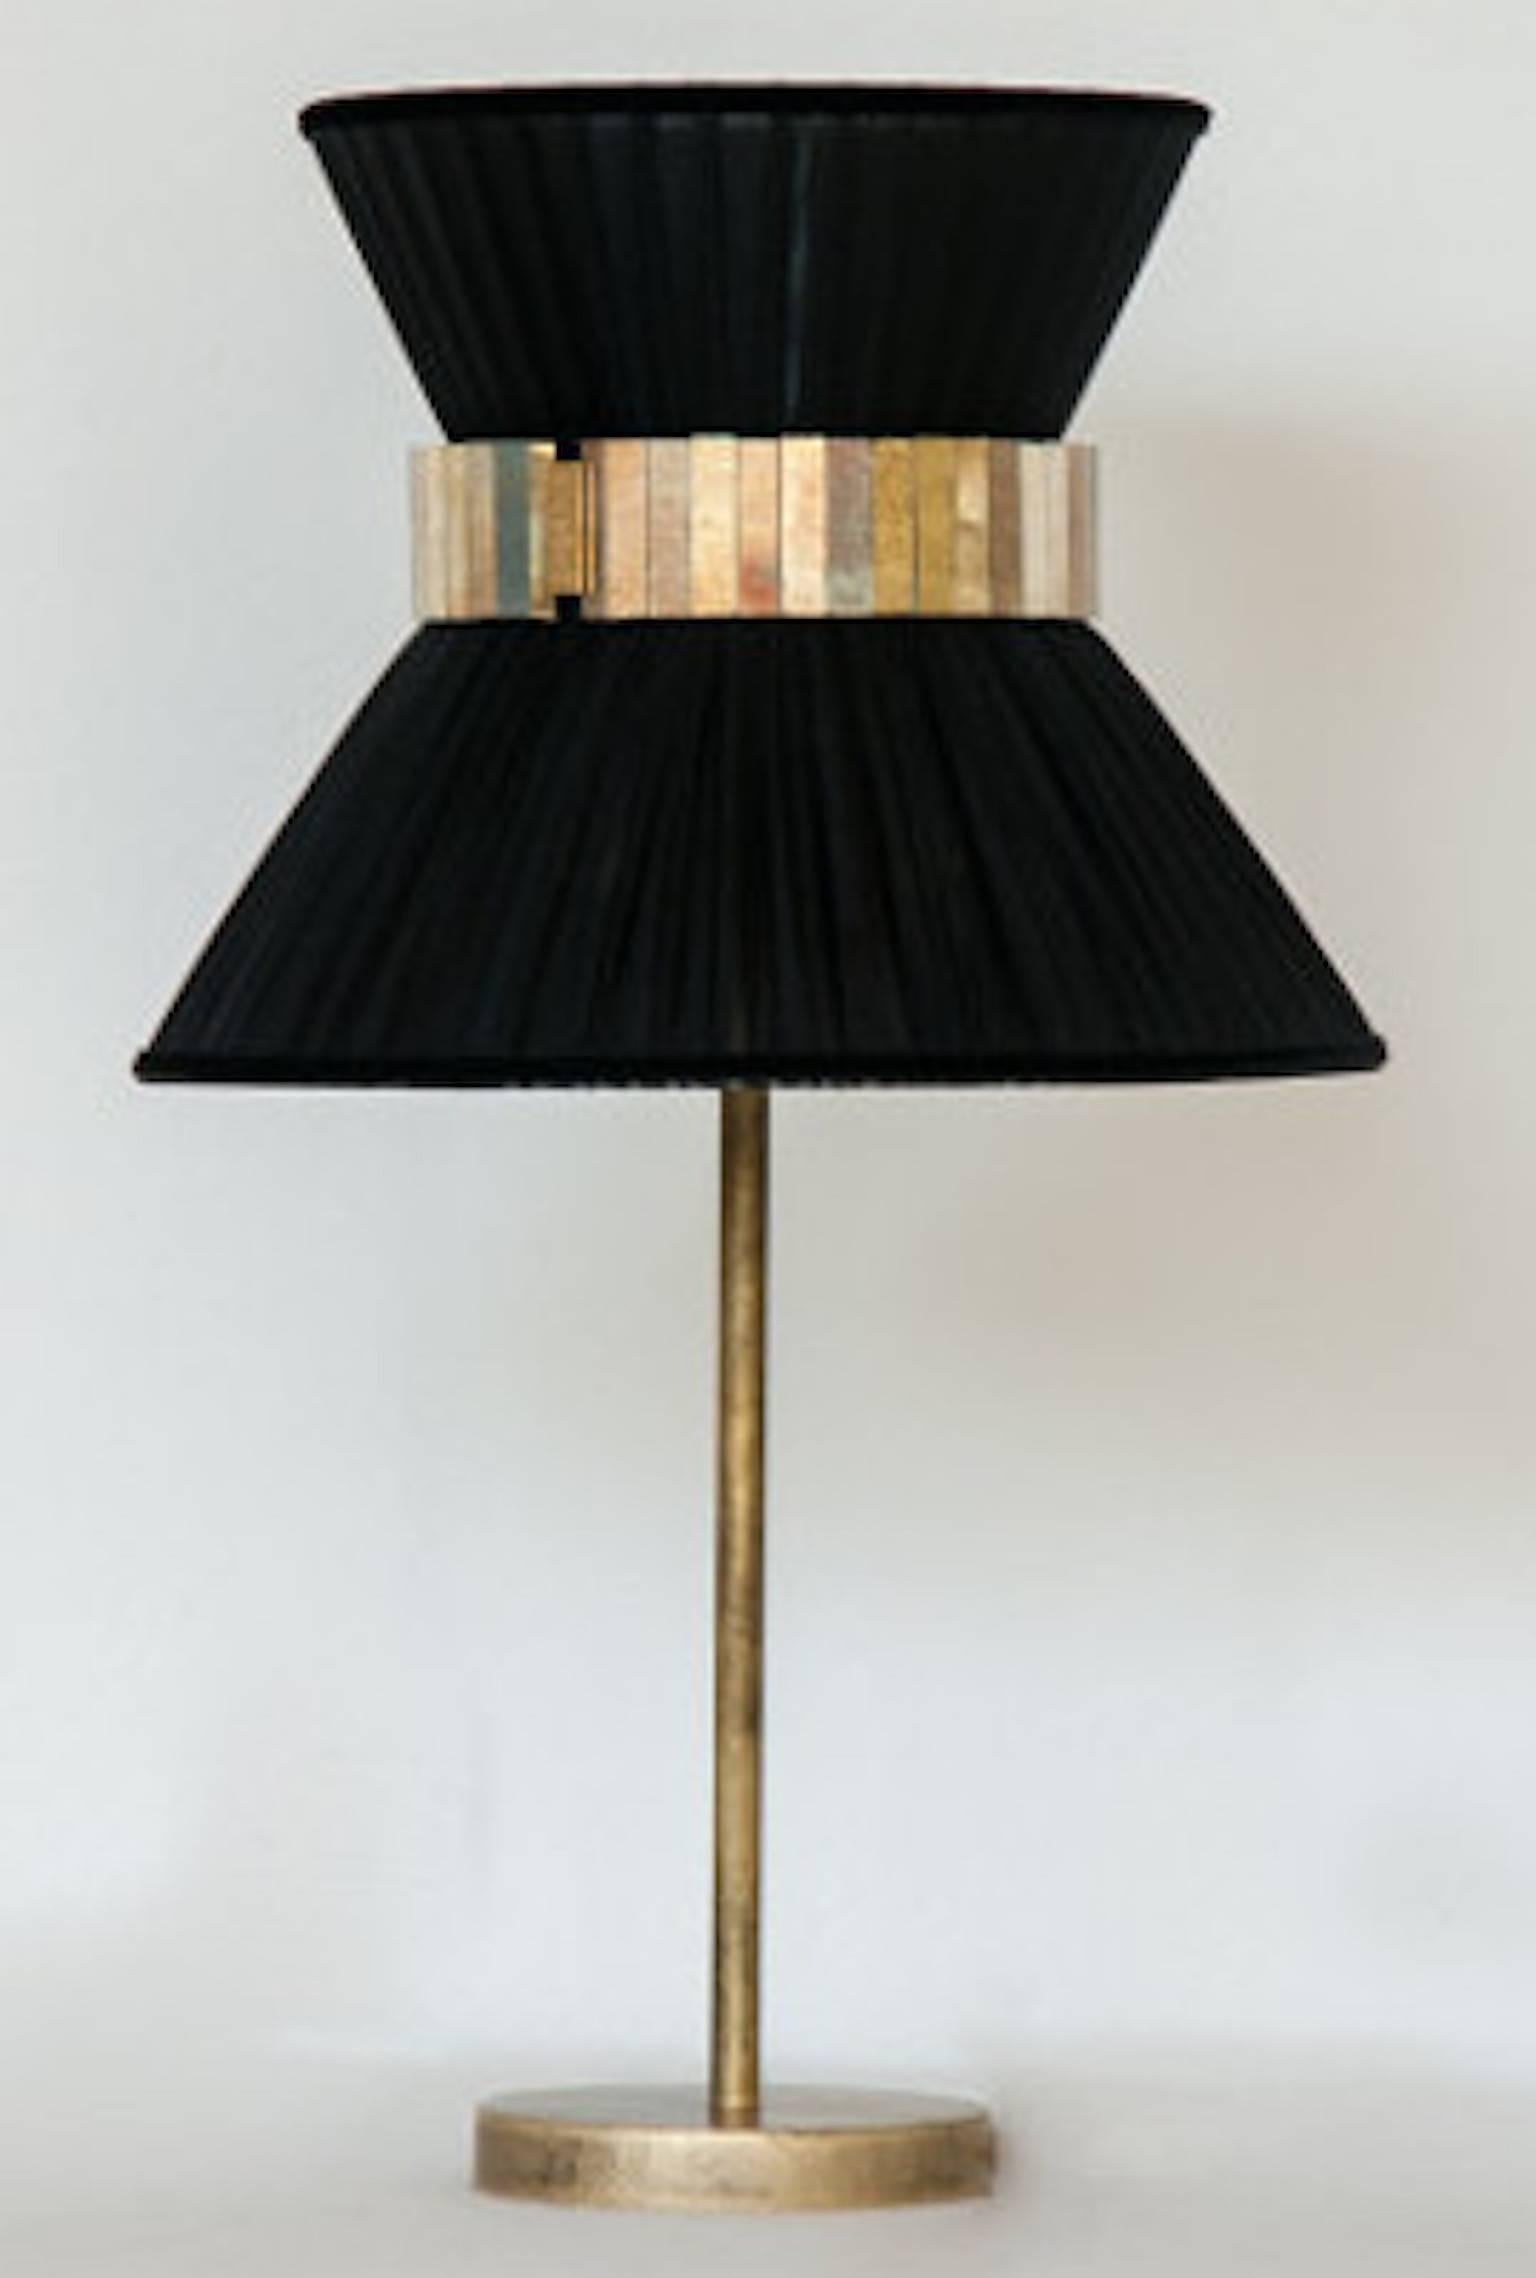 Designed and handmade in Italy by Sabrina Landini, the Tiffany lamp is inspired by the hat worn by Audrey Hepburn in Breakfast at Tiffany's. Silk organza shade, with antique hand silvered glass detail and brass finished base.